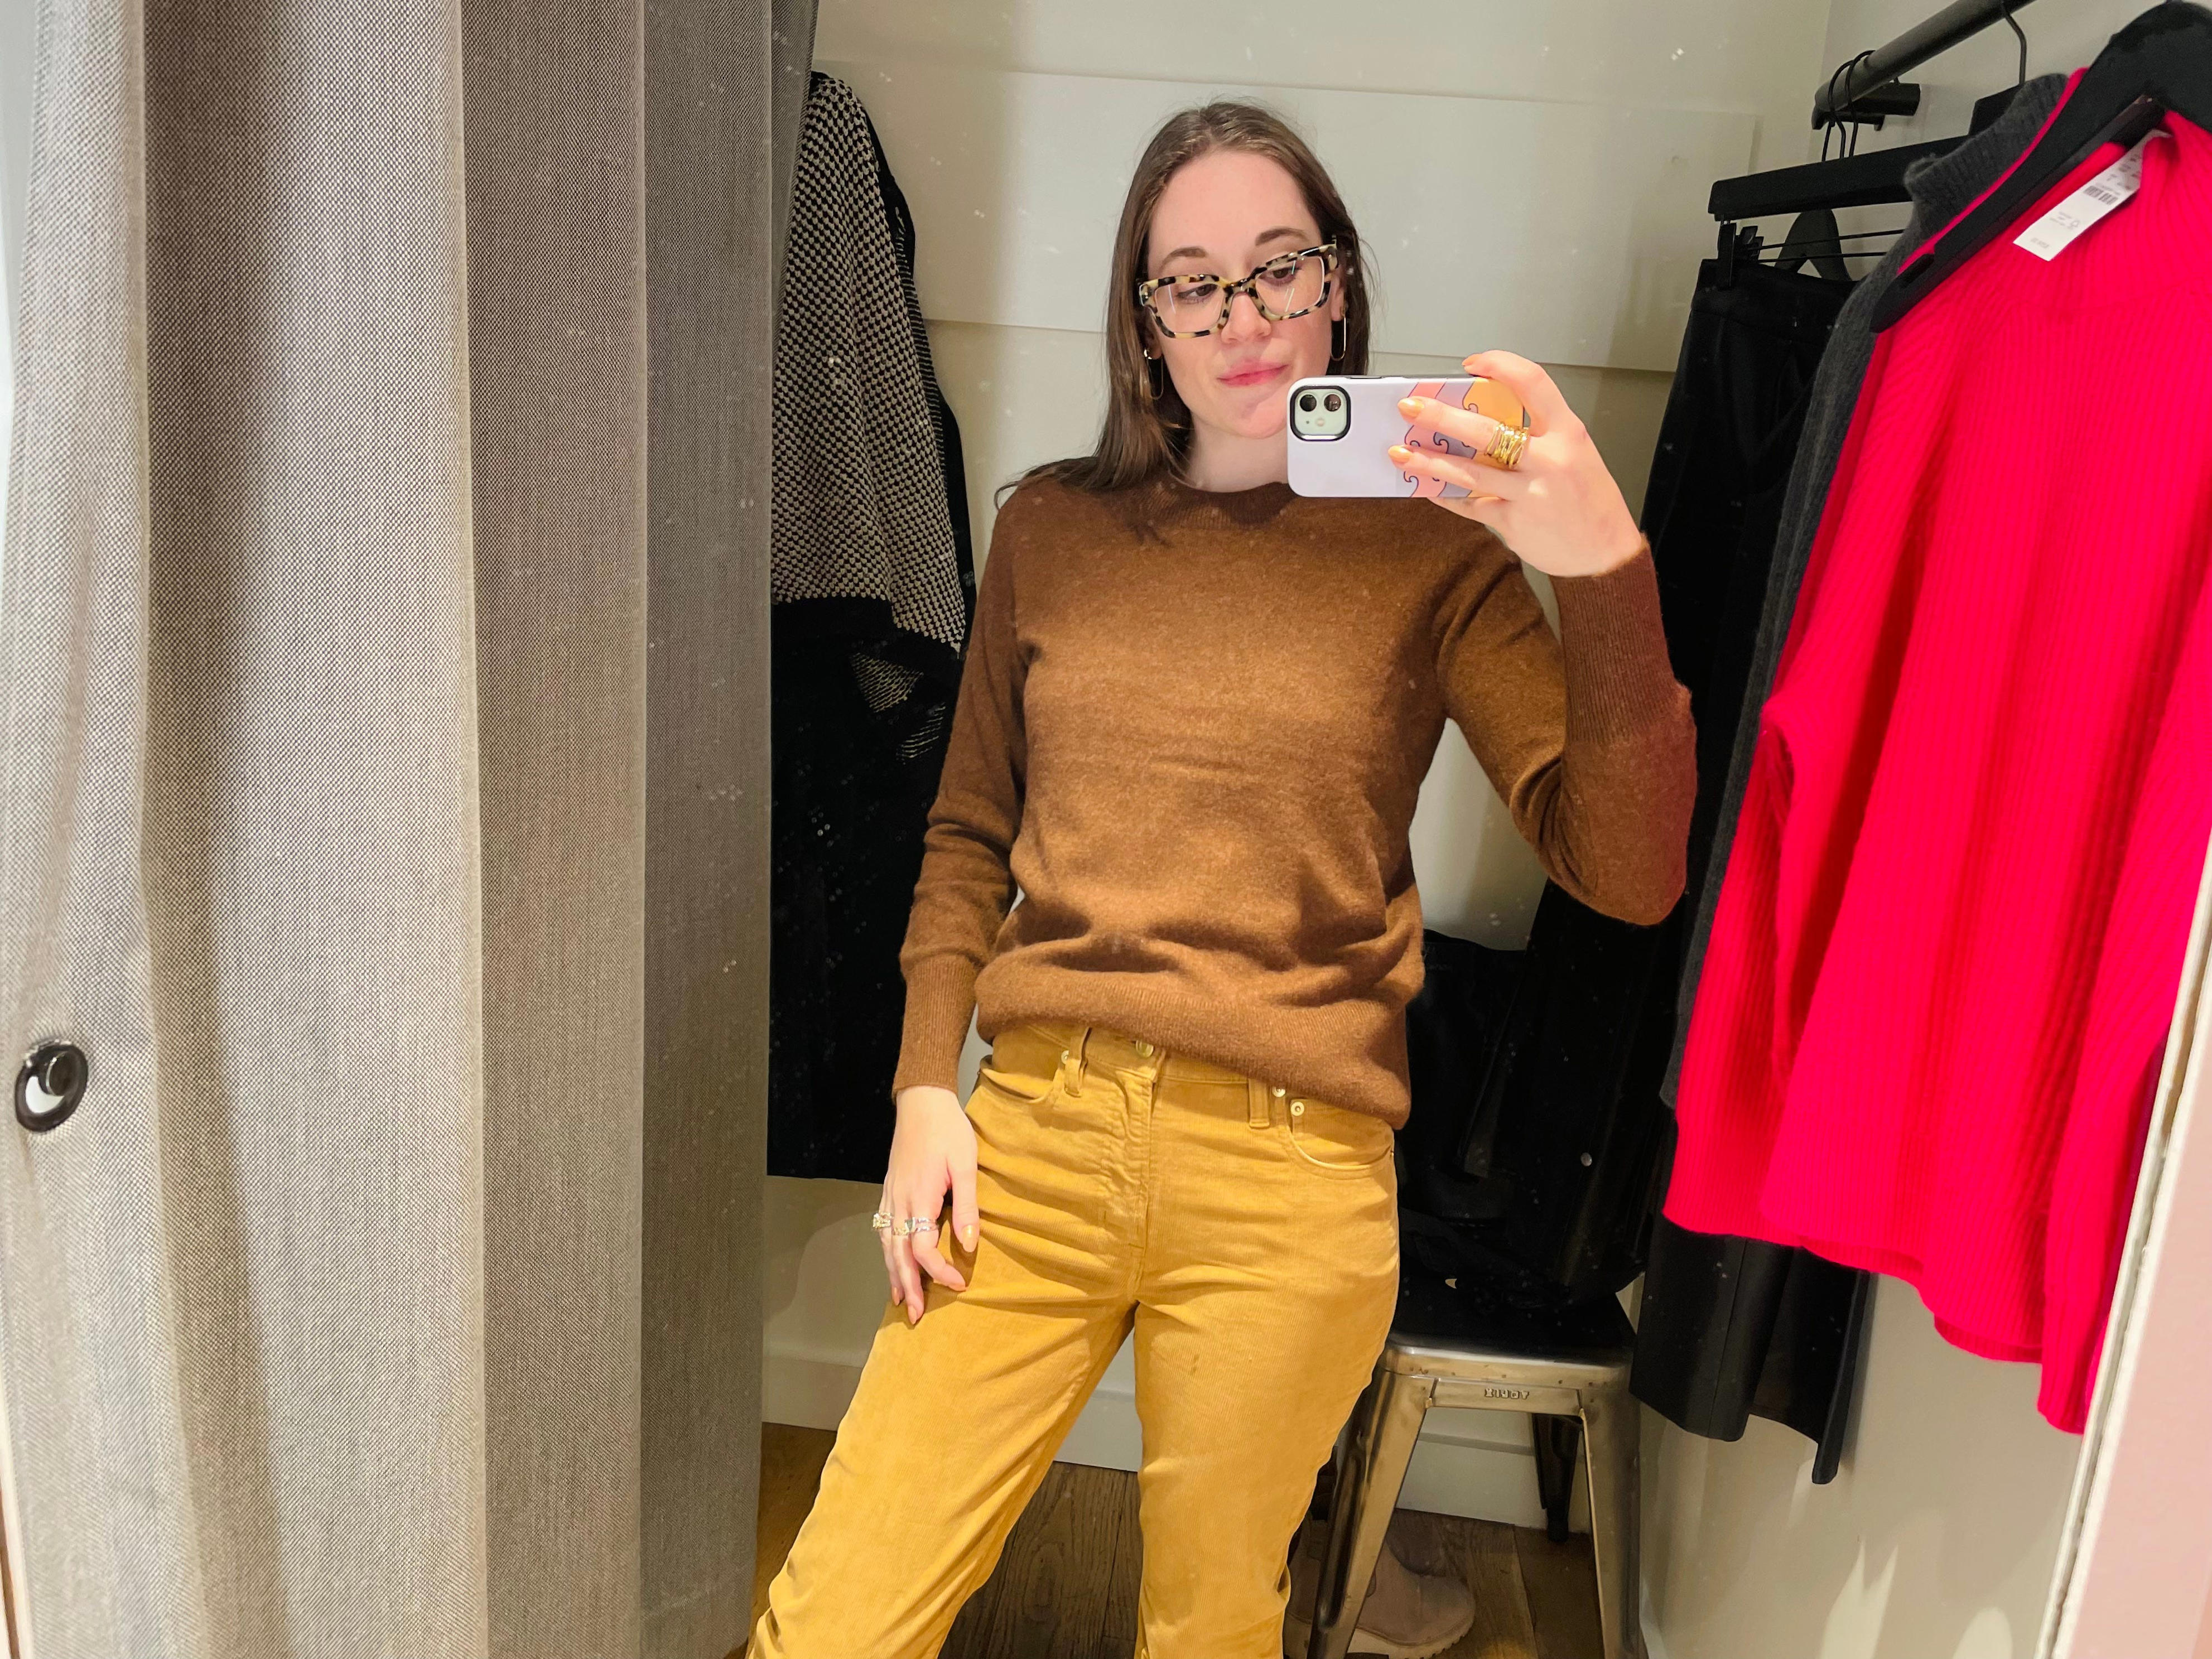 <p>The brown sweater was a nice staple, though I wasn't feeling the color on me. The corduroy pants were a miss. The color was too mustard and I didn't like the slim fit.</p>